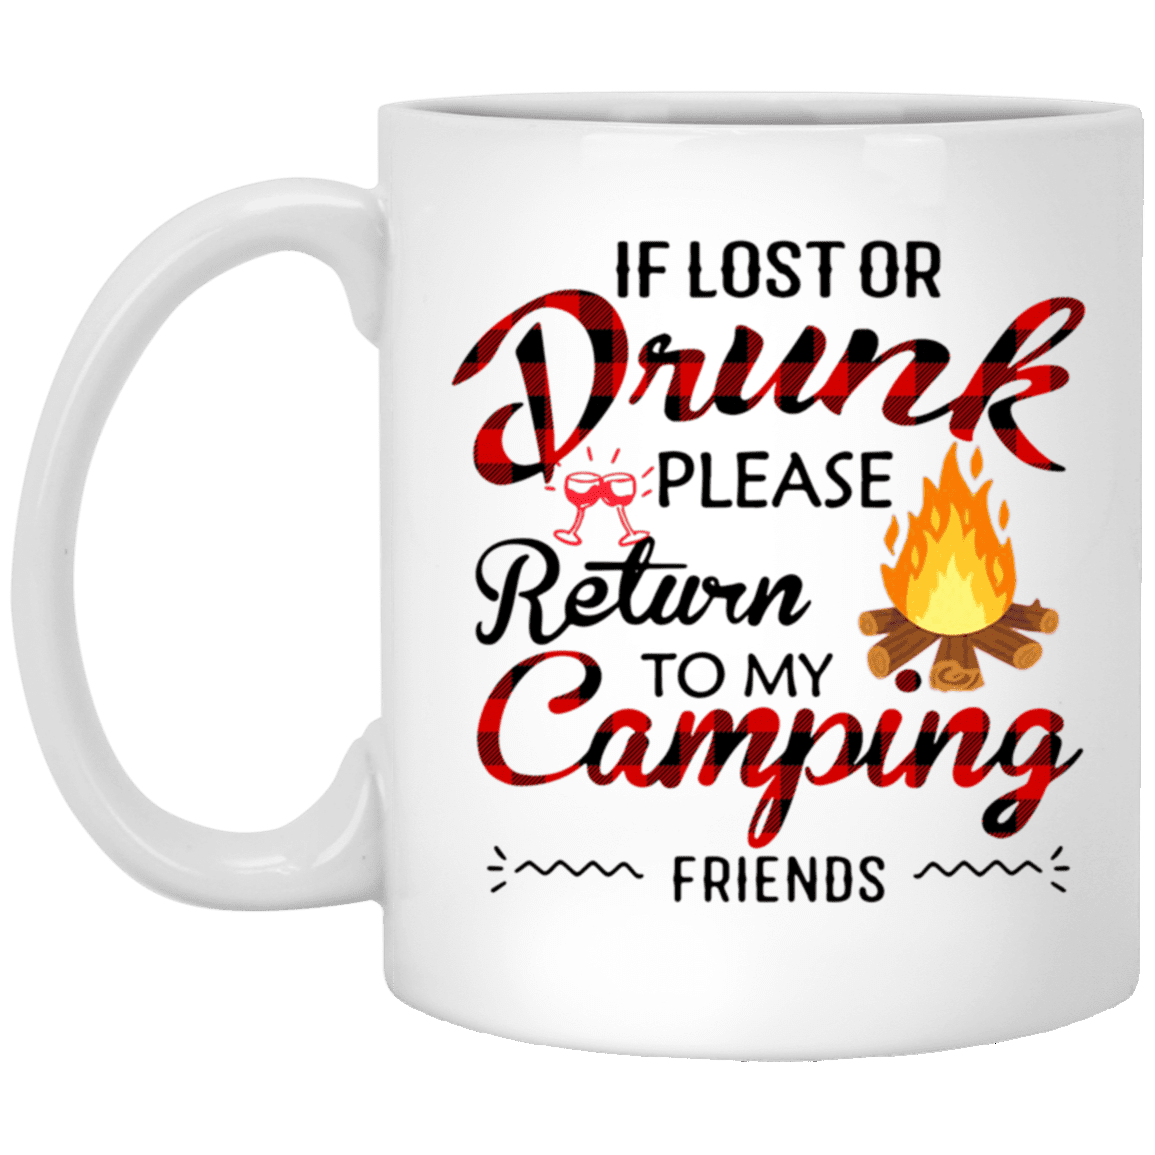 If you lost or drunk please return to my camping friends Mug, Coffee Mugs, Cup